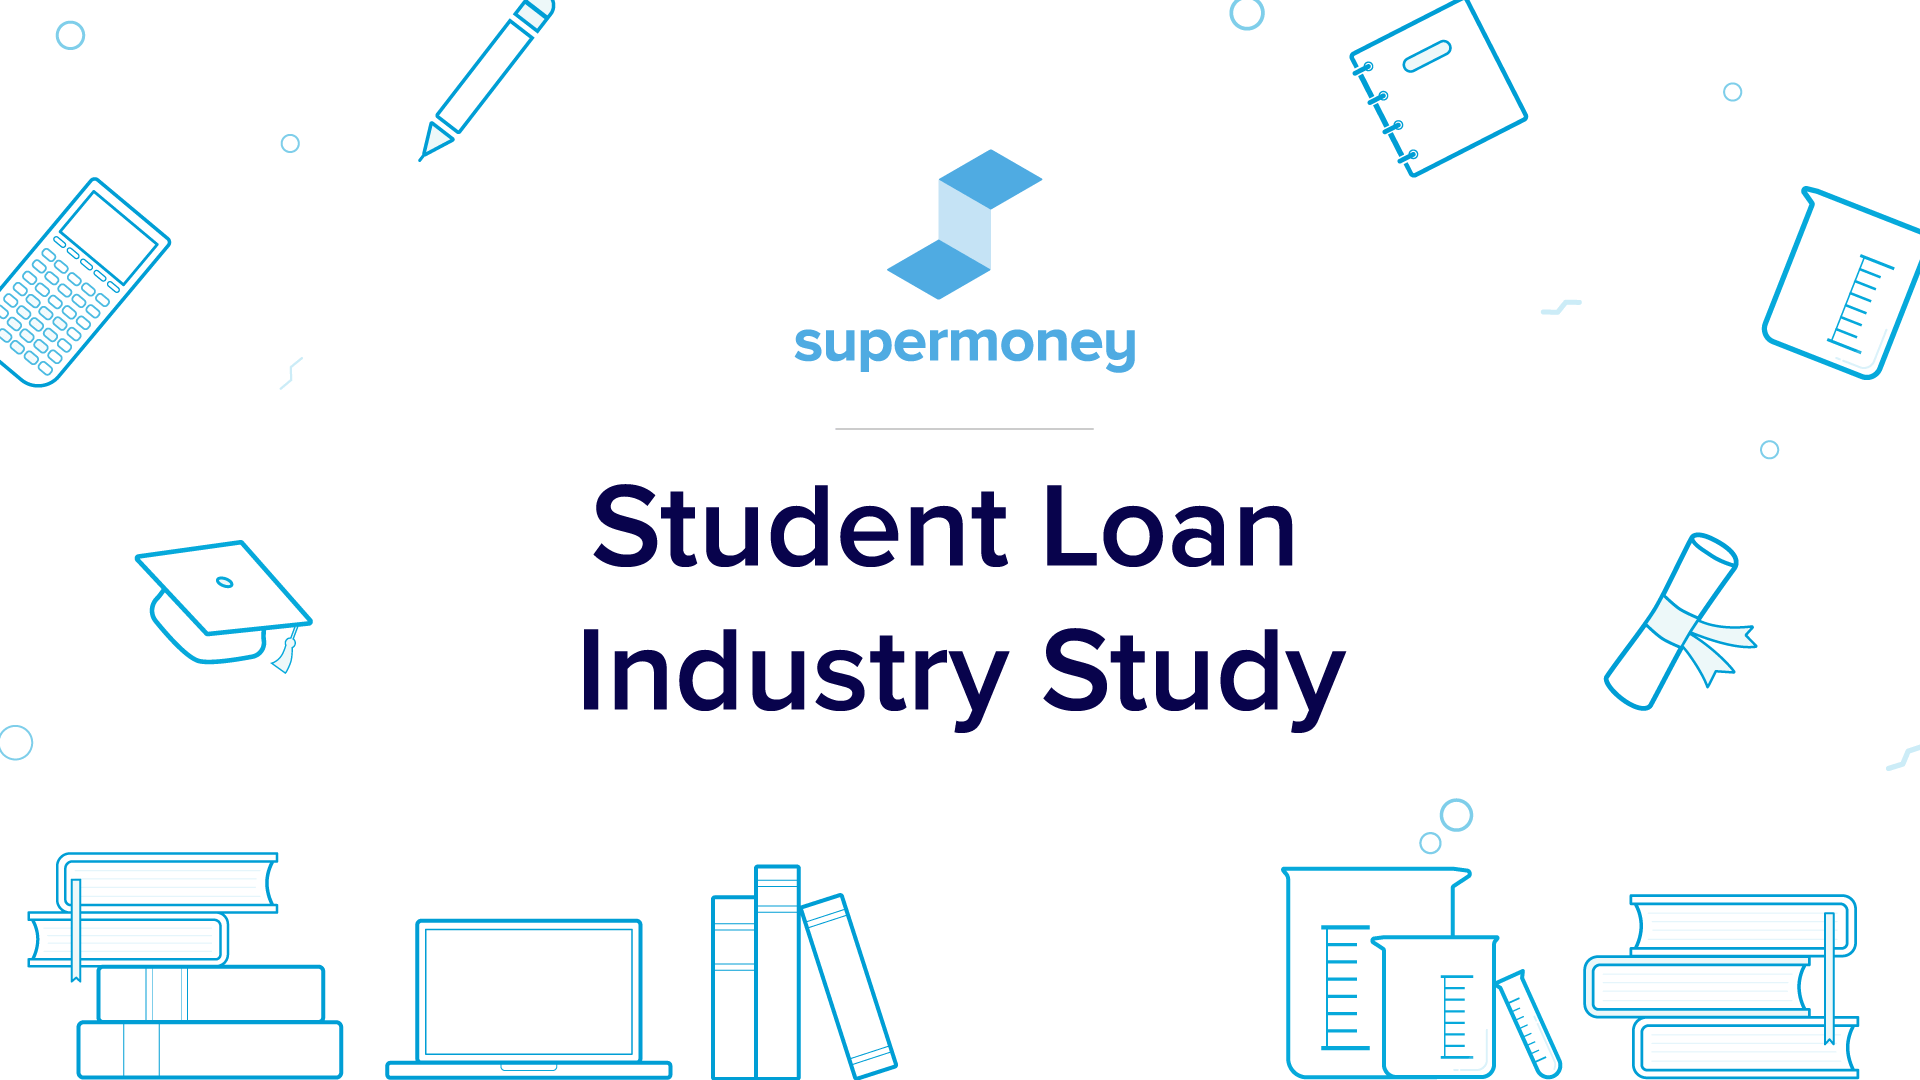 Student Loan Industry Study